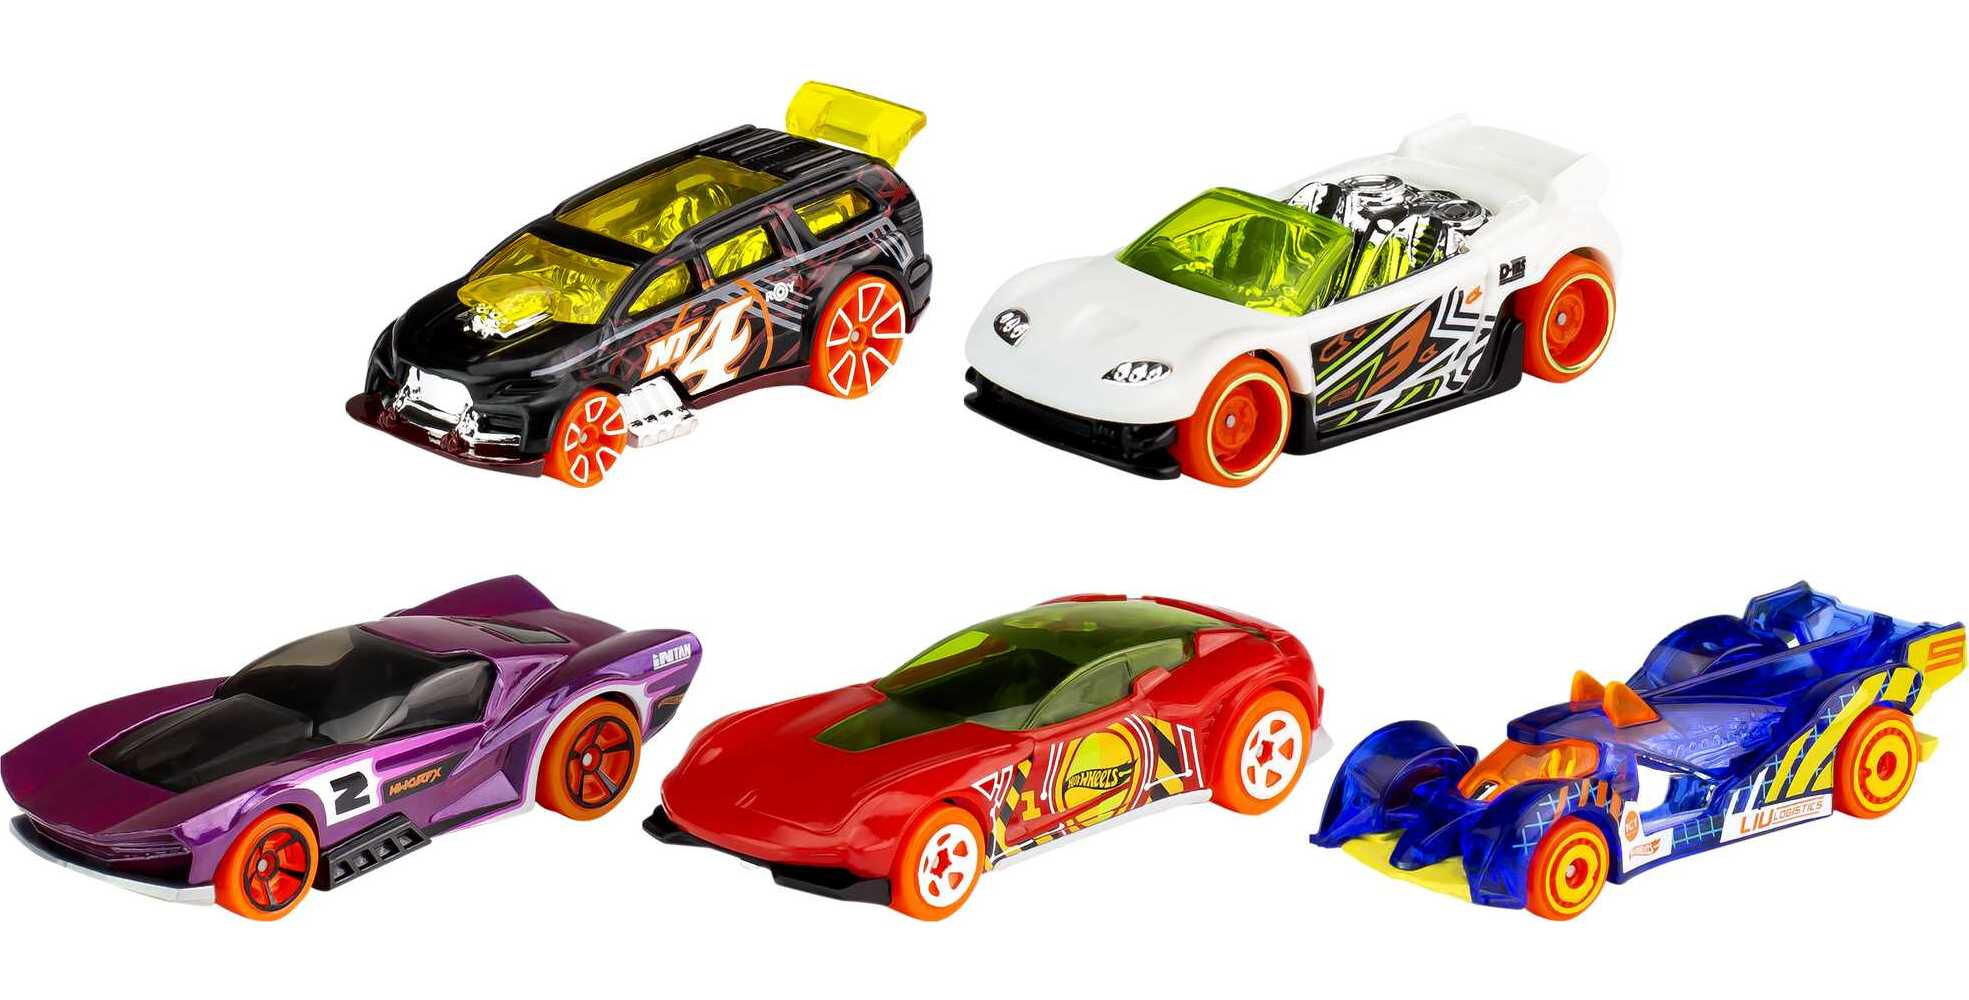 Hot Wheels Cars, 5-Pack of Die-Cast Toy Cars or Trucks in 1:64 Scale (Styles May Vary) - image 6 of 7